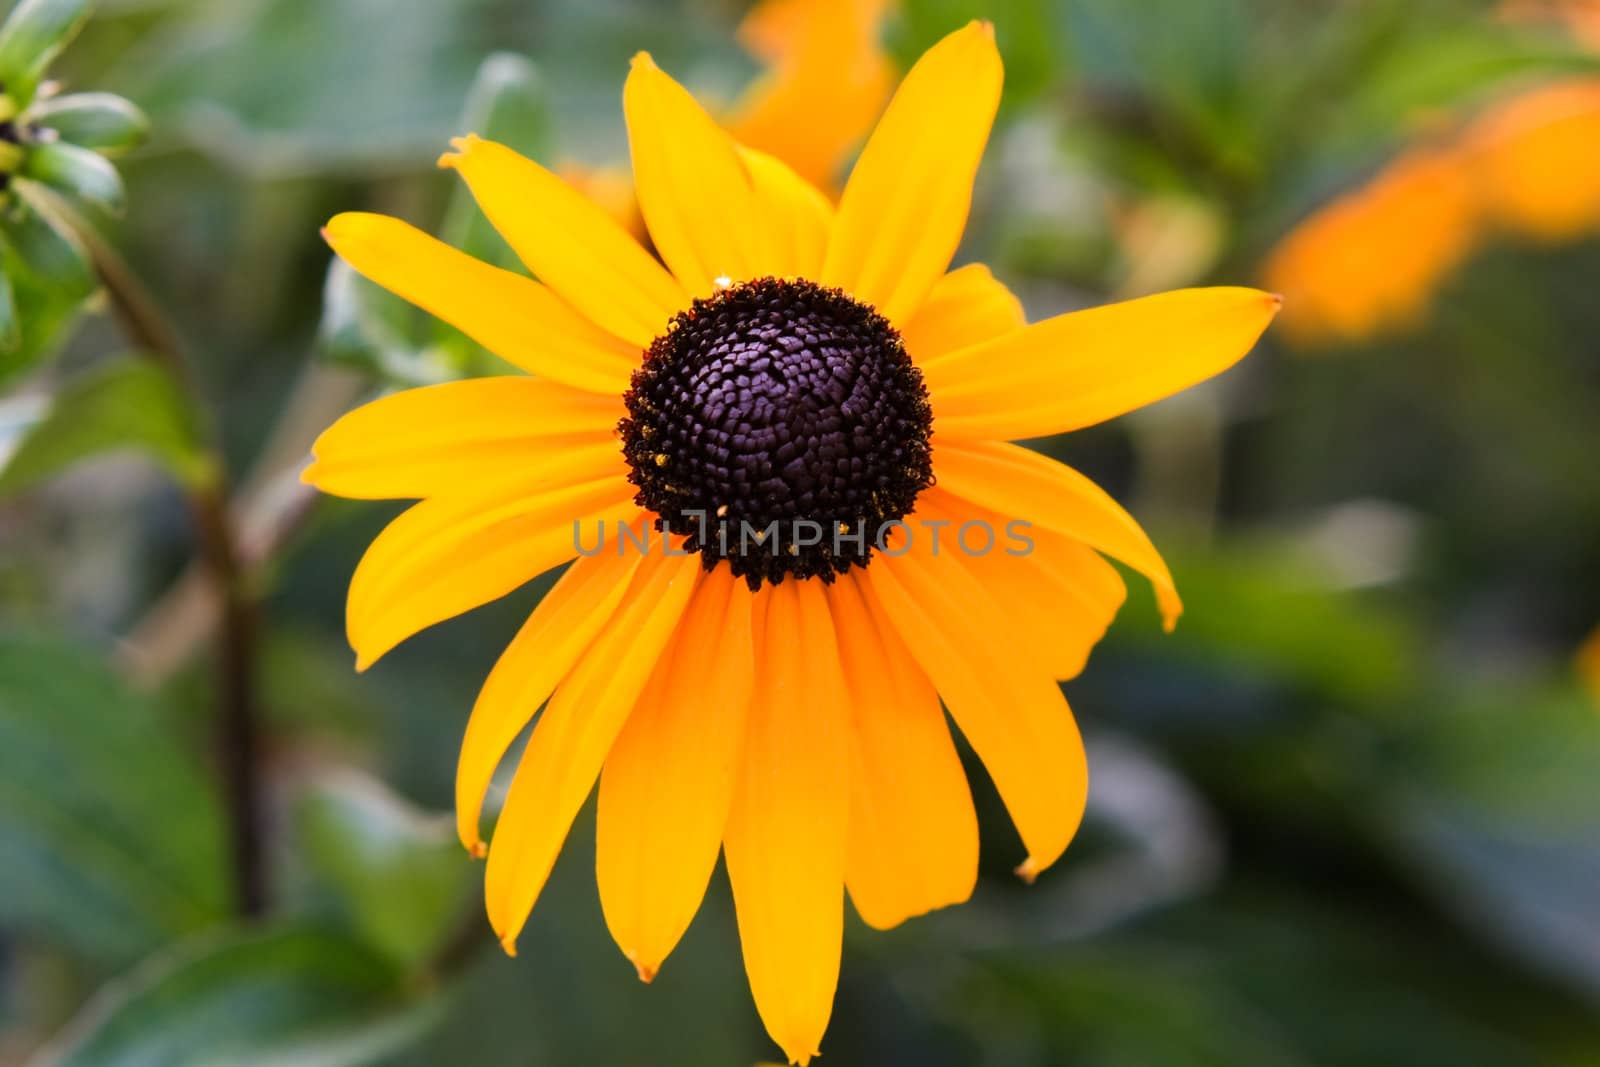 Black eyed susan wild flowers in yellow and black